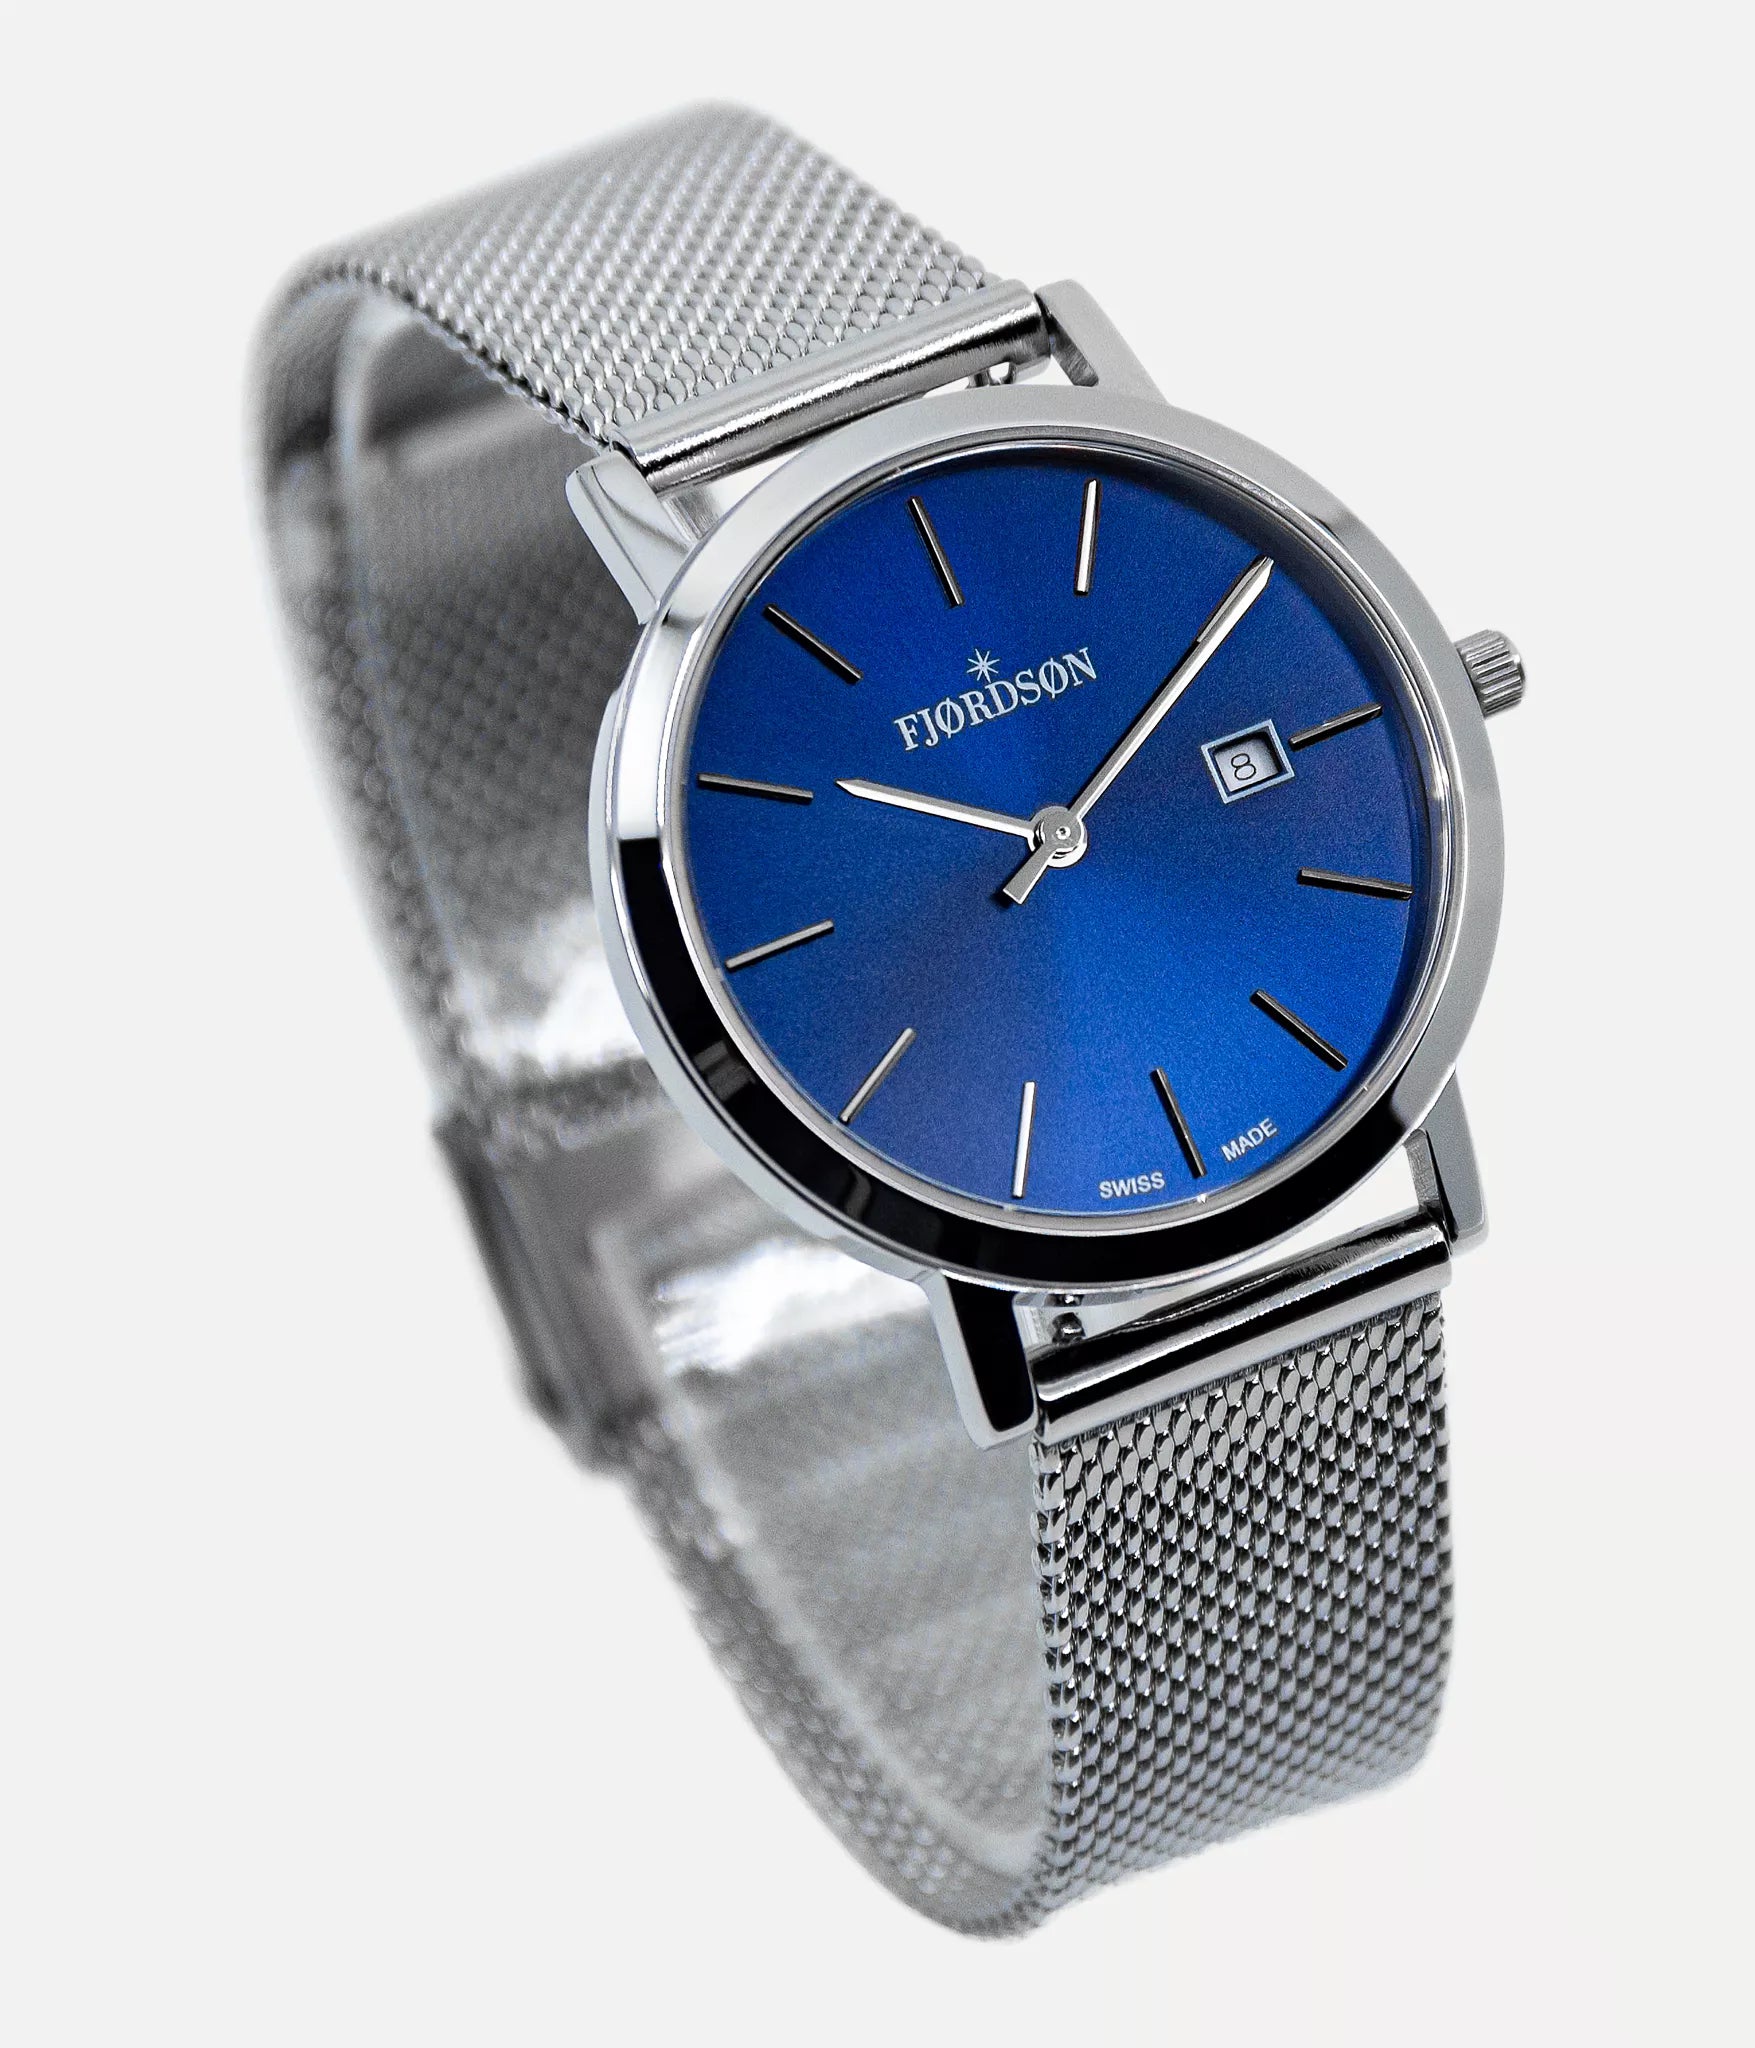 Strap on blue dial watch - Fjordson Silver Metal Mesh Watch strap silver buckle - WOMEN - vegan & approved by PETA - Swiss made